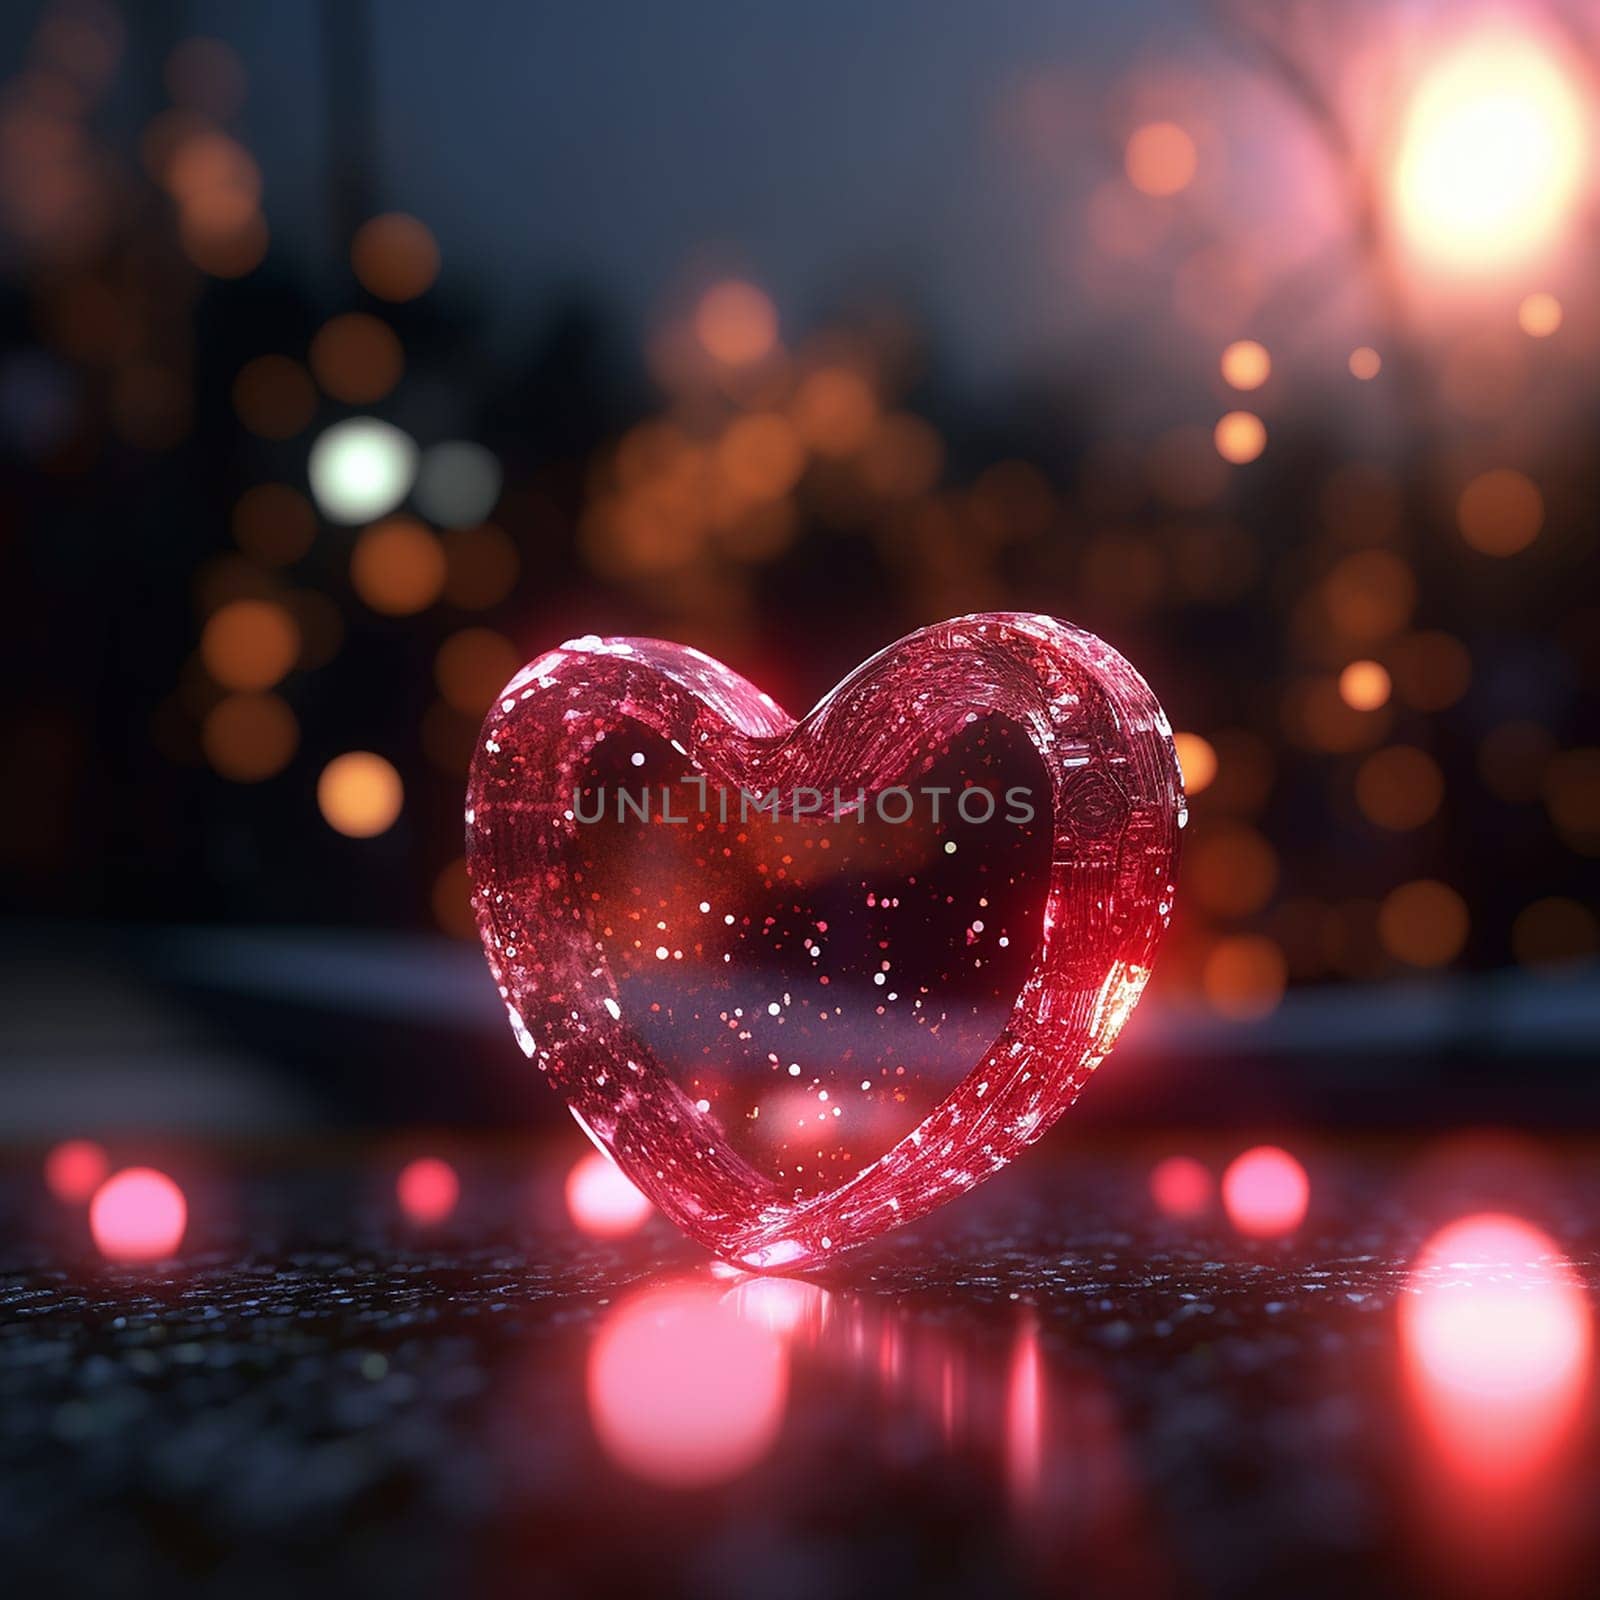 Illuminated red heart shape glowing against a blurred city lights backdrop.